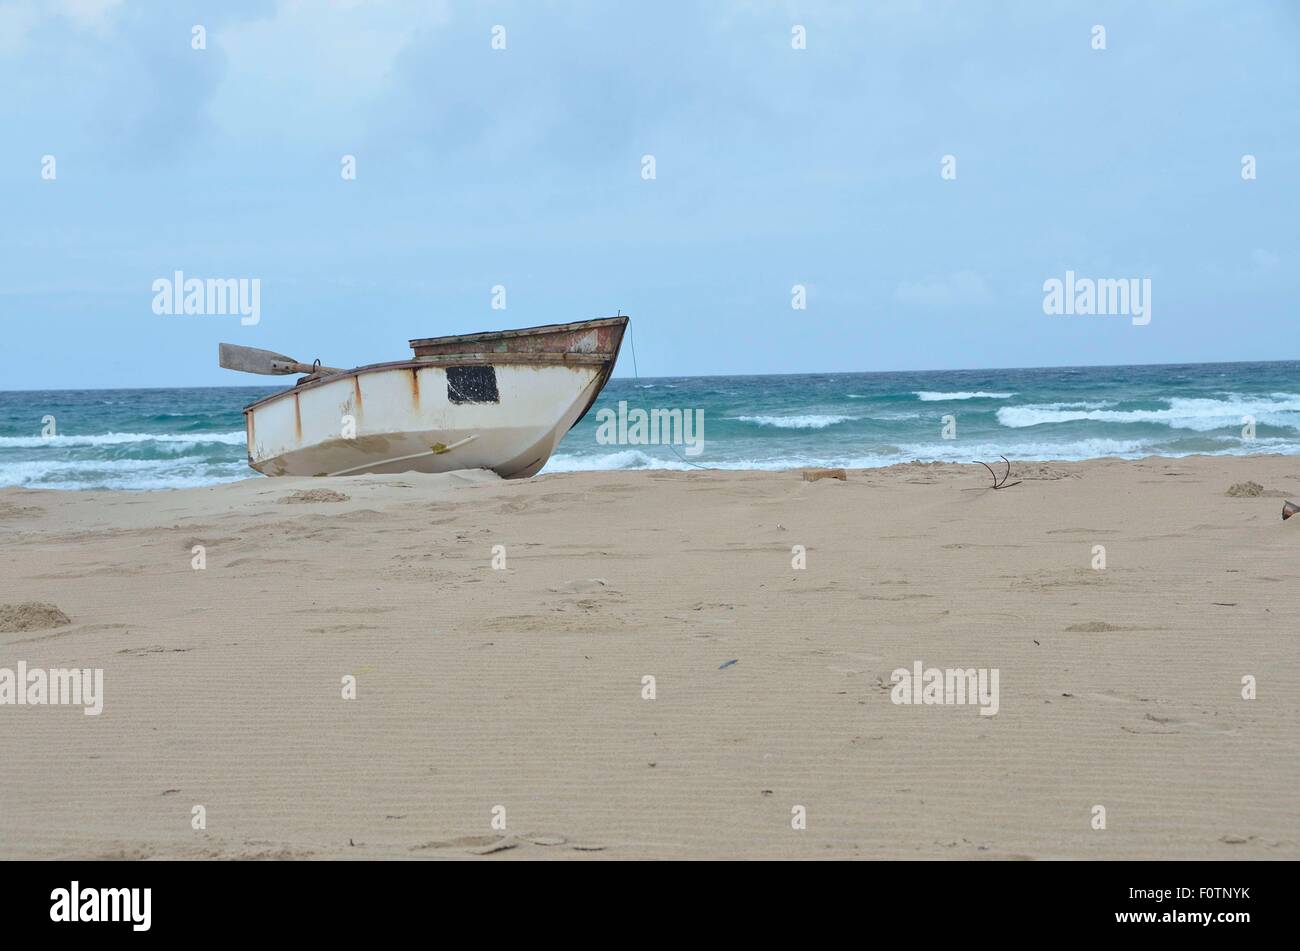 This old, unsafe fishing boat lying on the beach at Inhambane, Mozambique is in daily use. Stock Photo